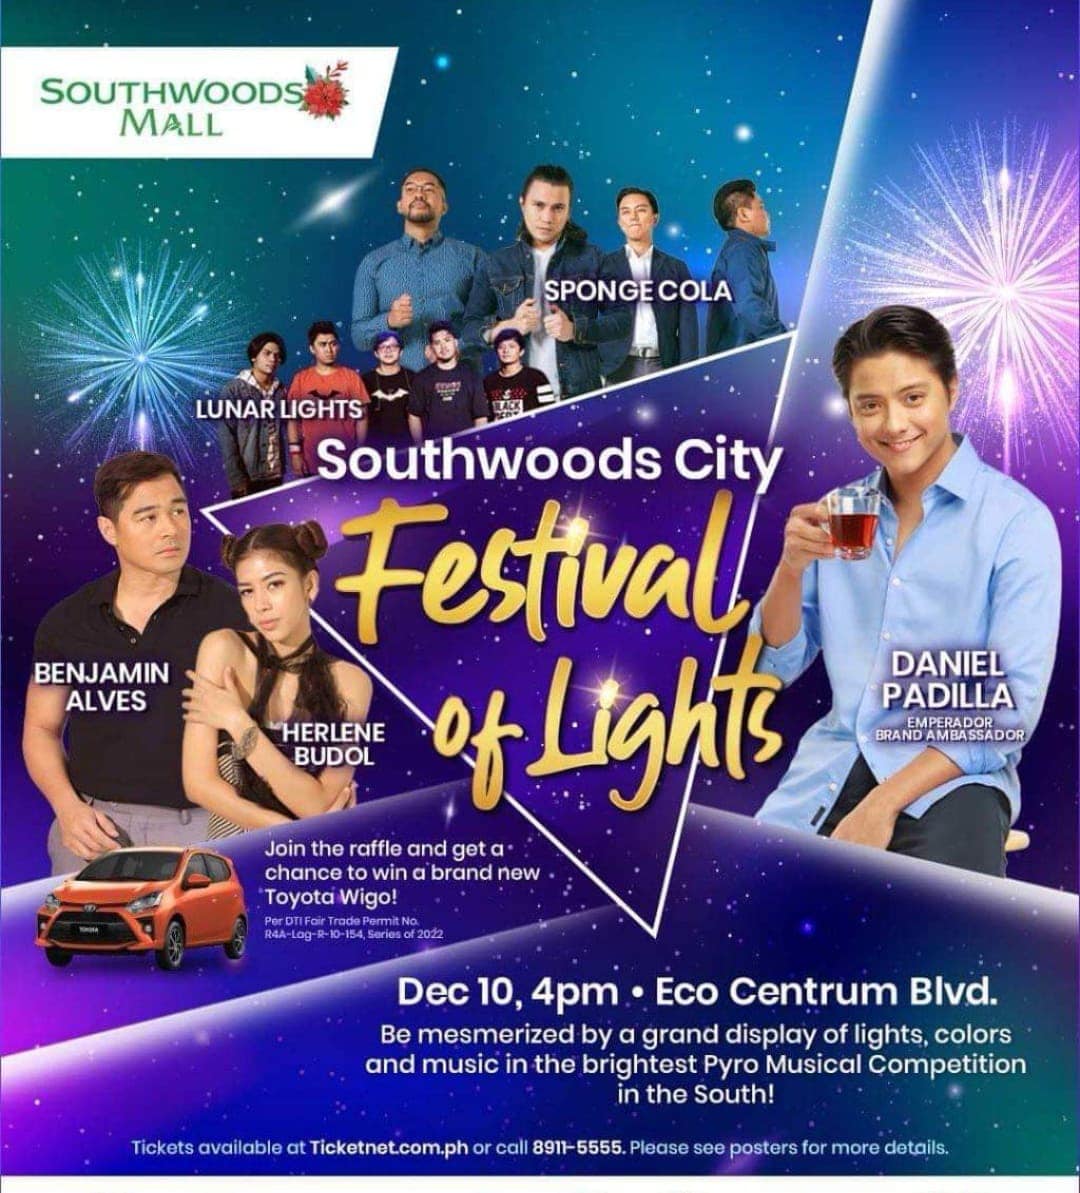 Festival of lights at southwoods mall